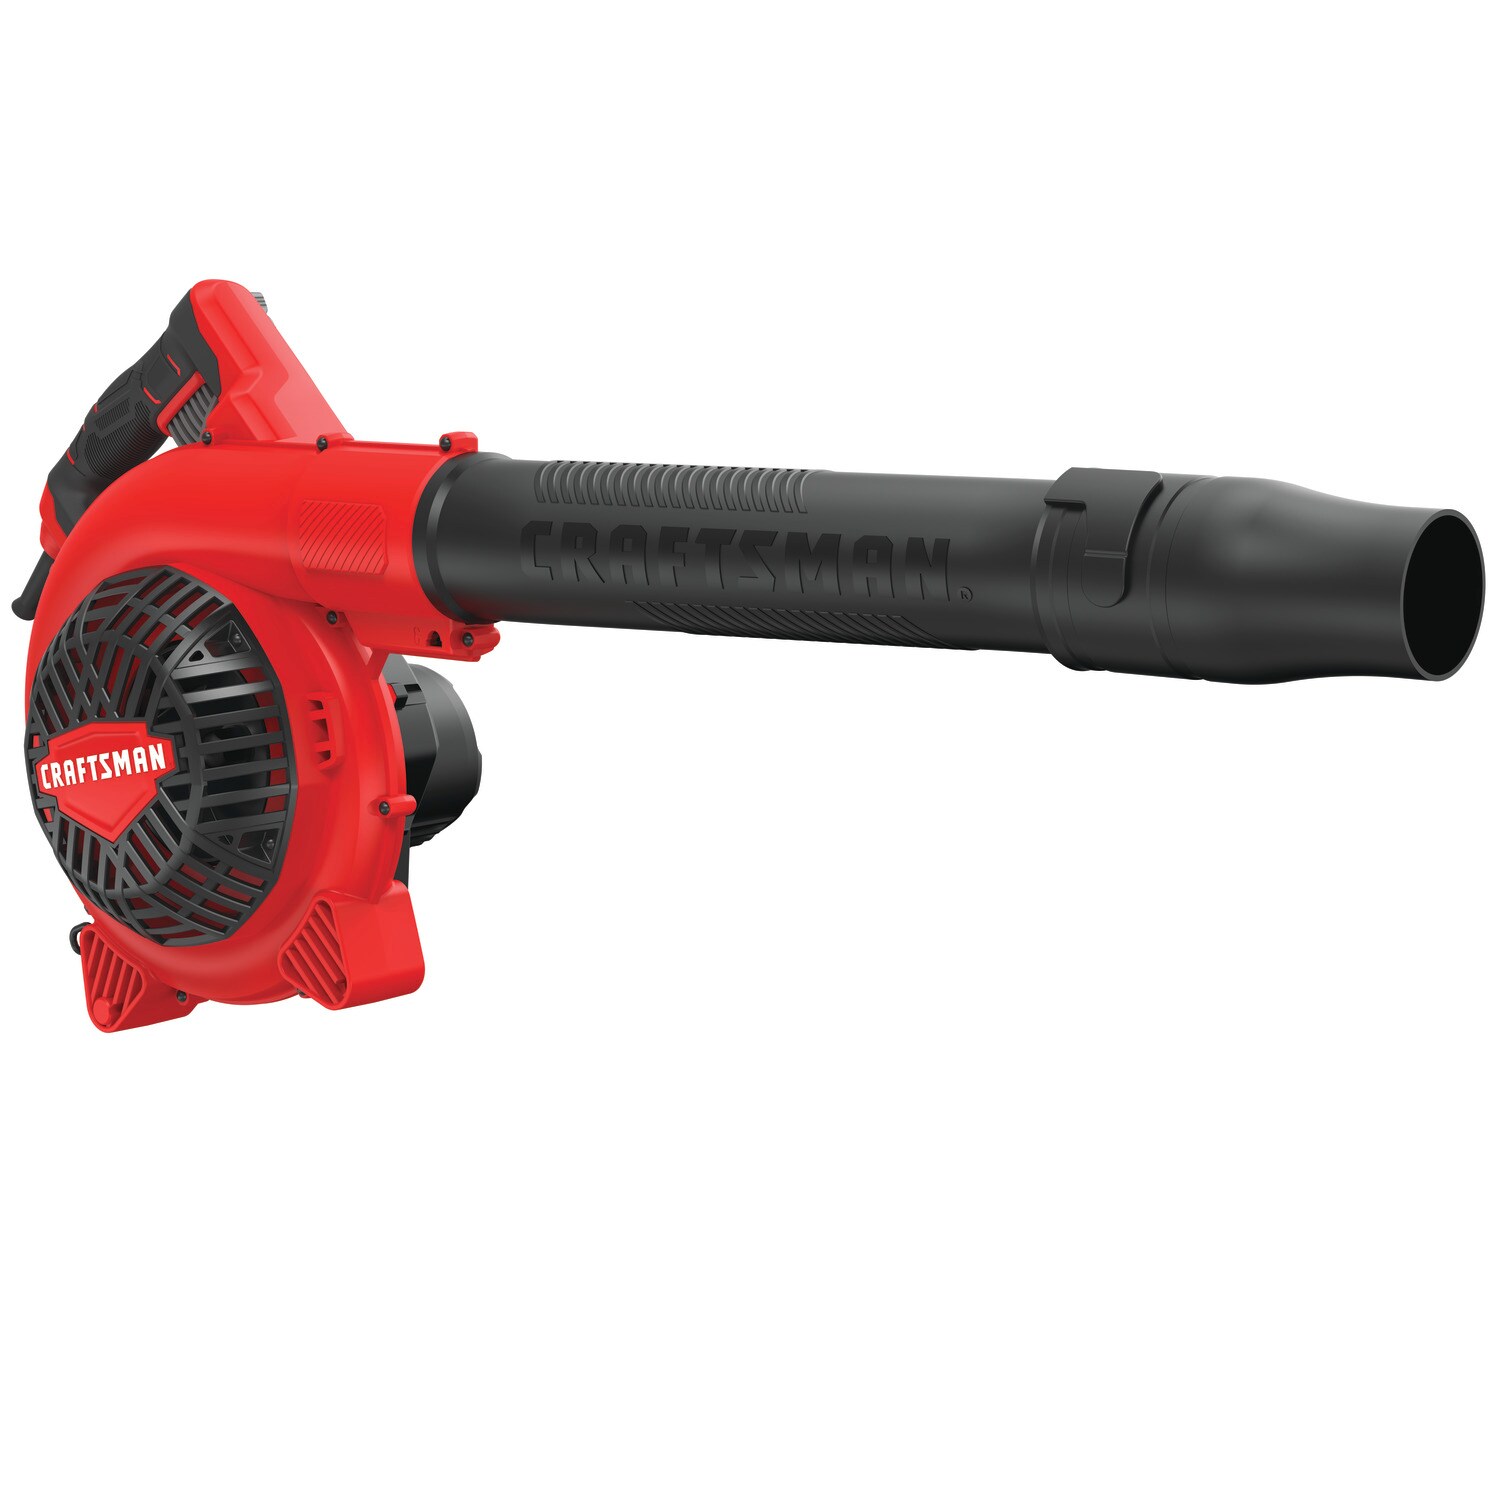 Promaker Corded Electric Leaf Blower, Small Handheld Blower/Vacuum for Home, Air